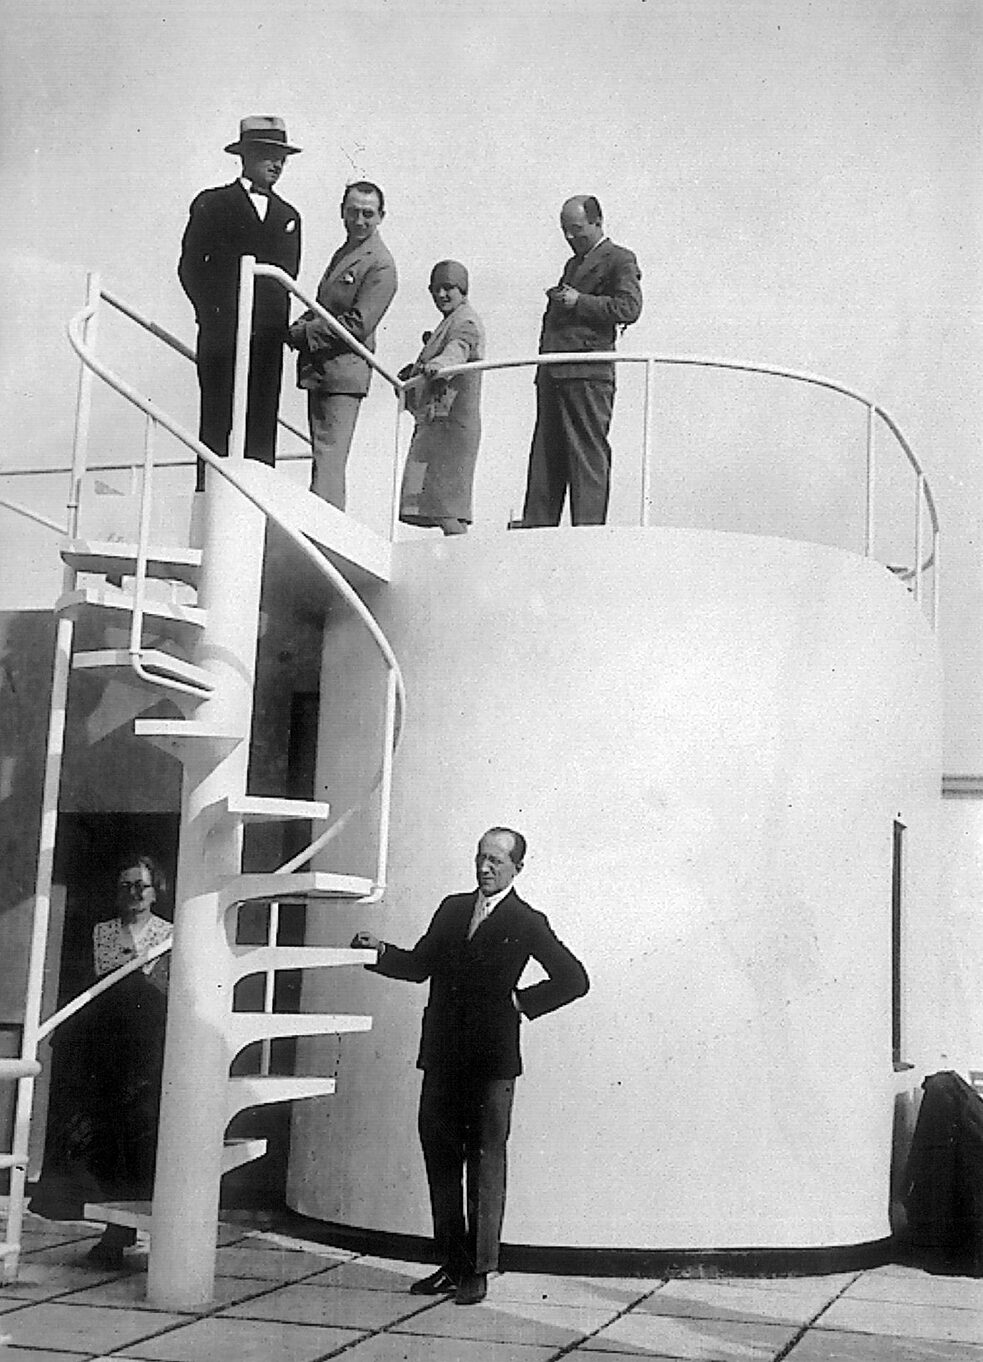 Visiting Le Corbusier’s home in Paris, 1928: below is Pitt Mondrian, above on the right are Sofie and El Lissitzky. On the left are Le Corbusier’s employees. 